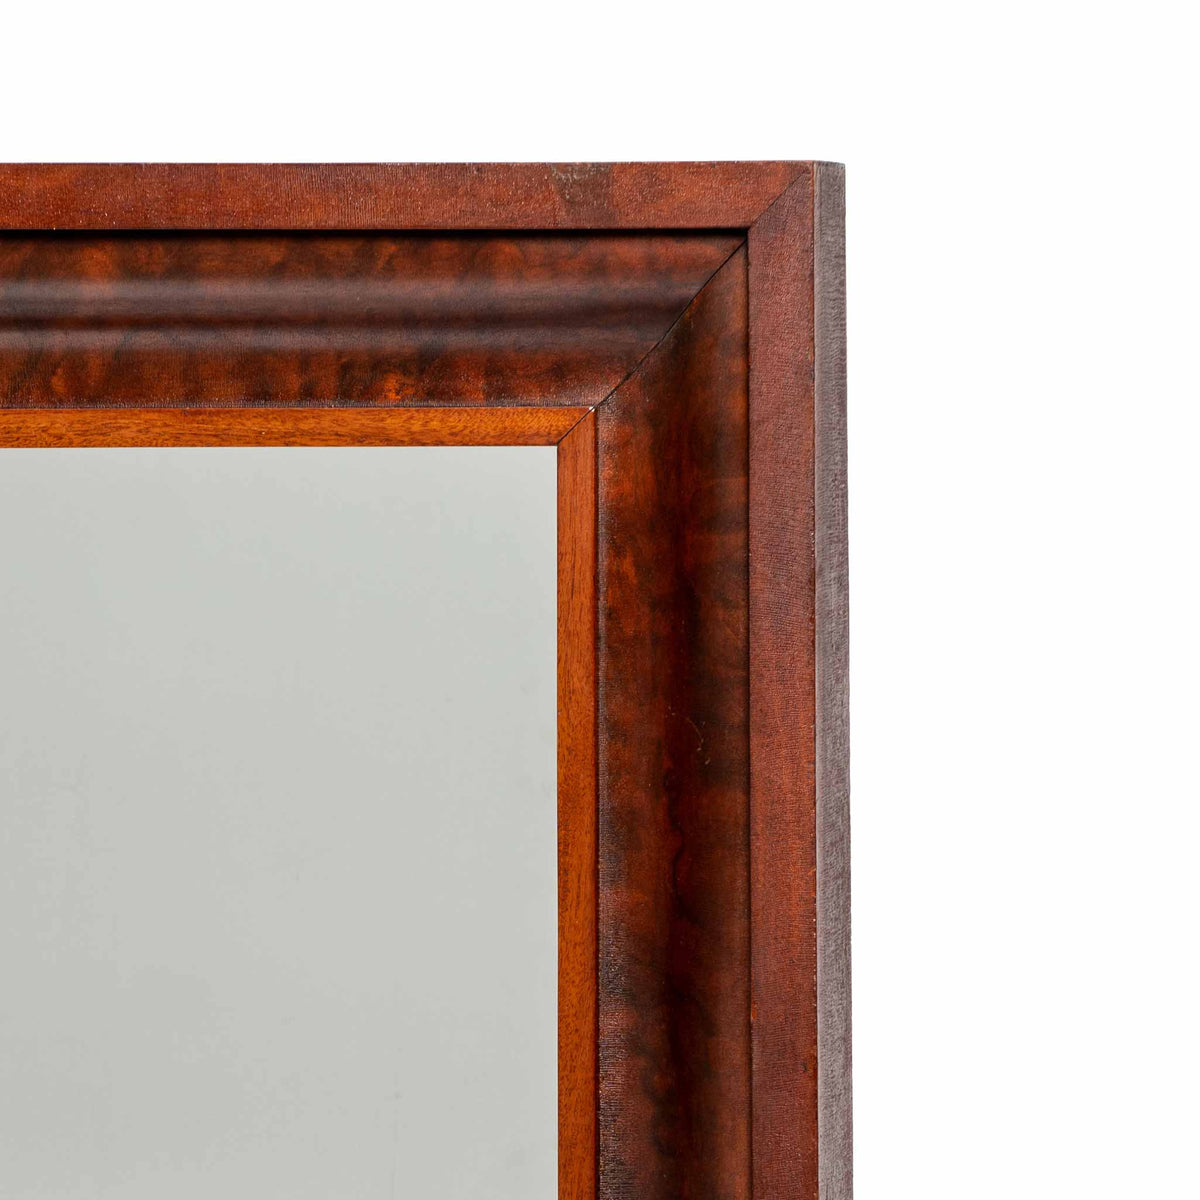 Mirror thick frame S1 F34